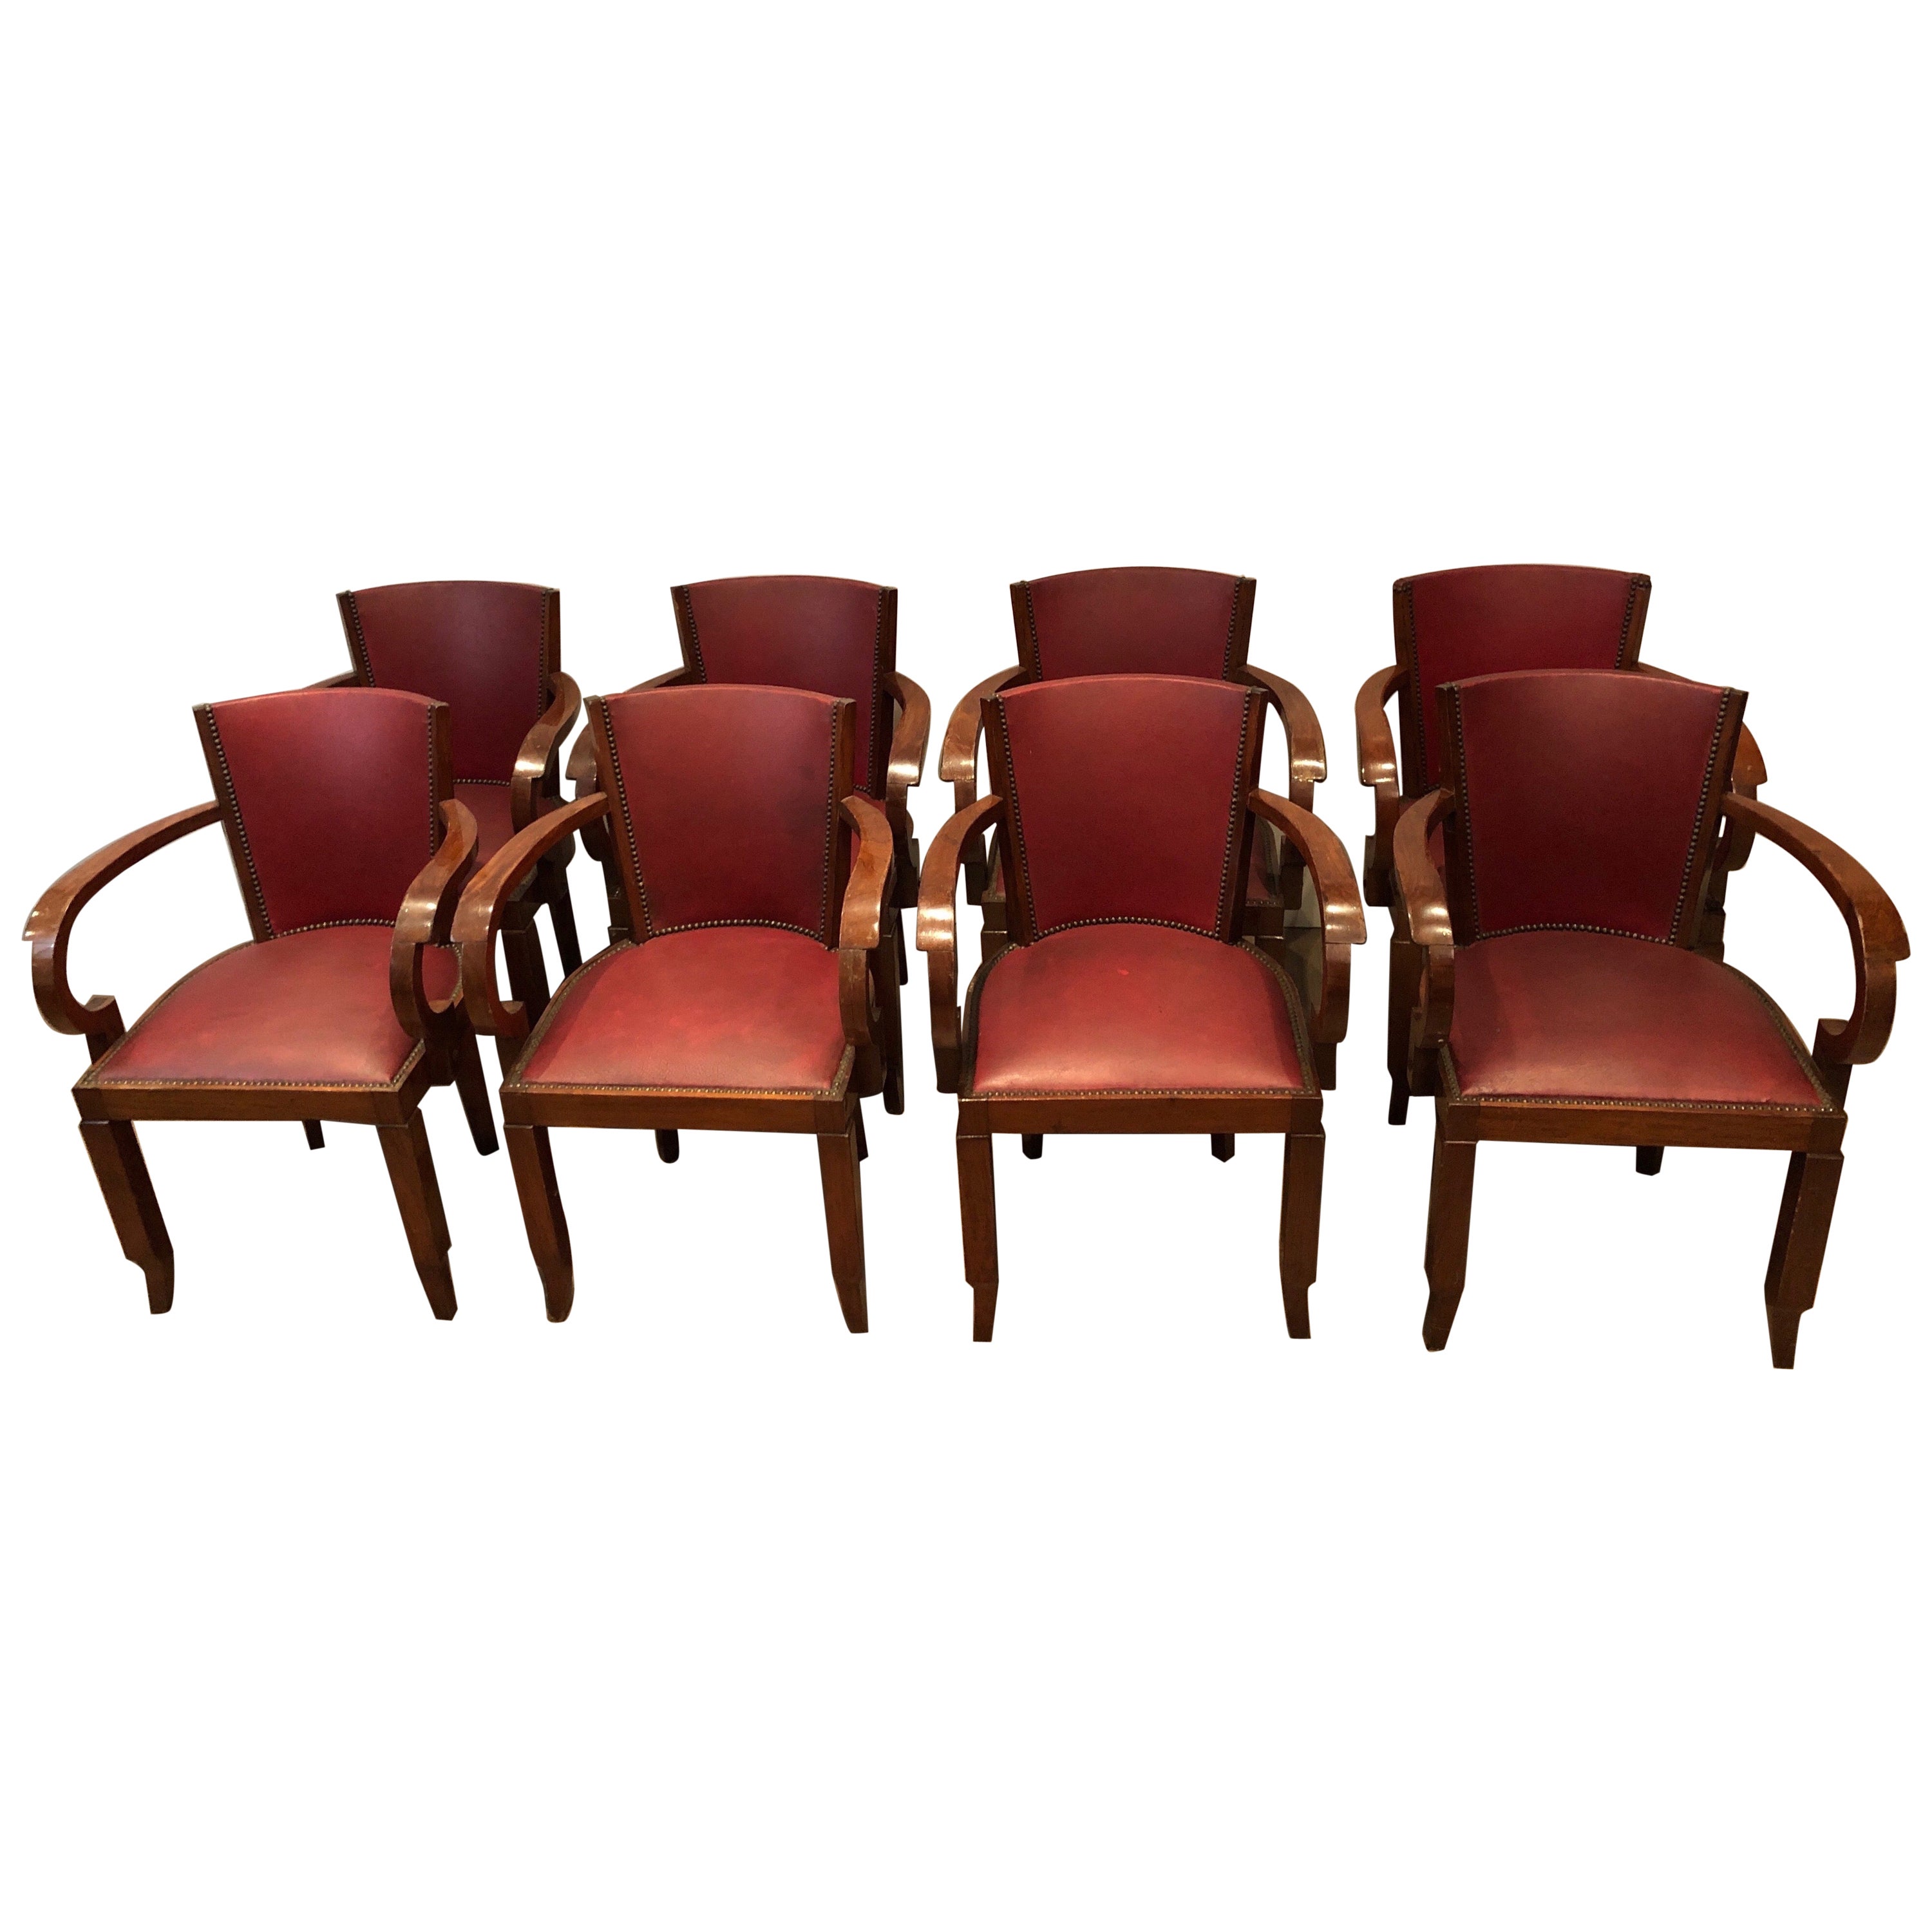 Rare Set of 8 Mahogany and Faux-Leather Art Deco Armchairs, French, circa 1930 For Sale